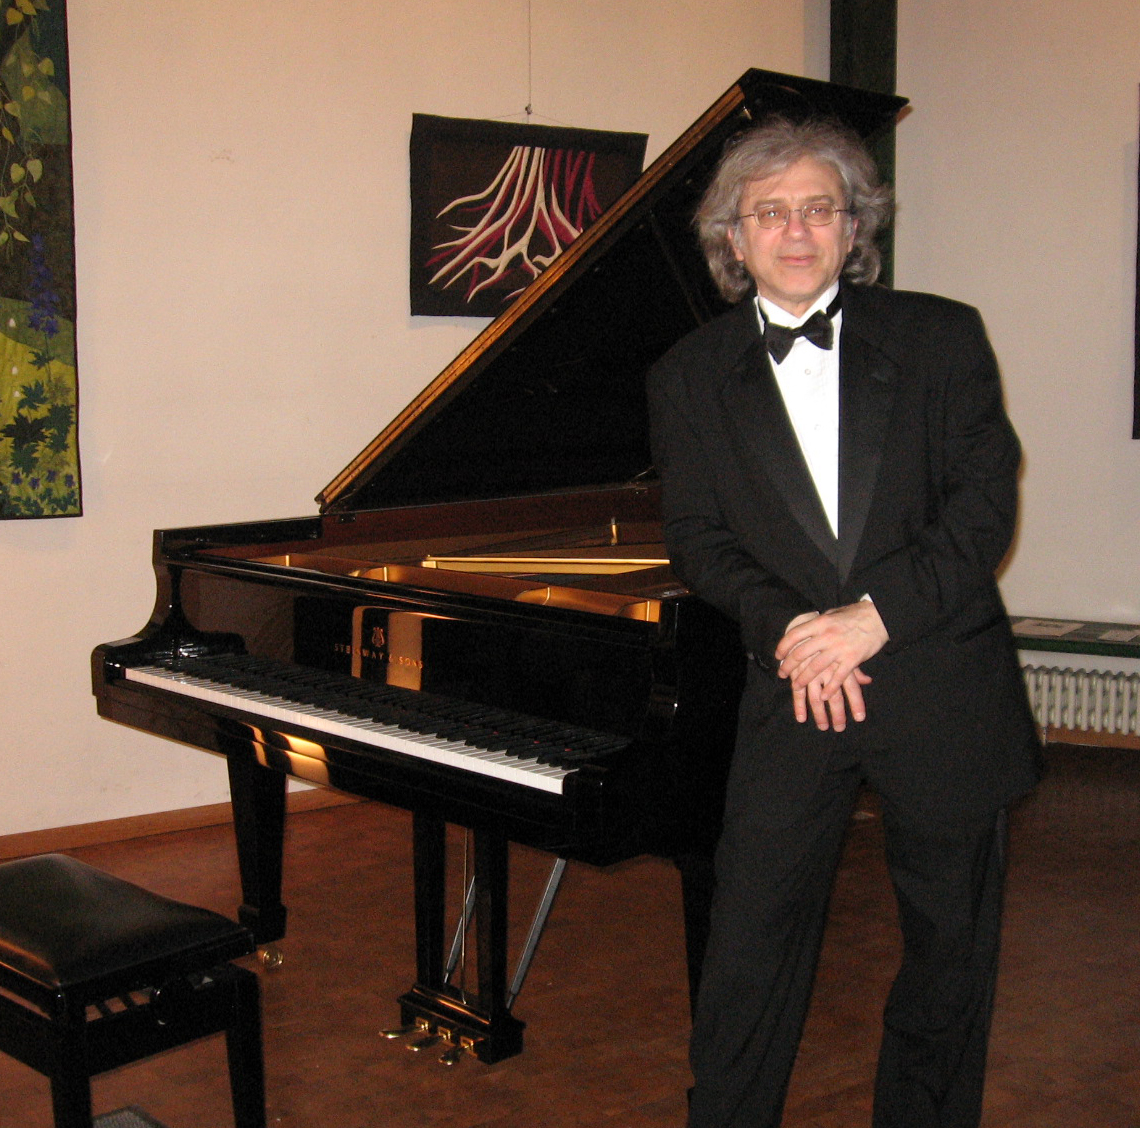 You won’t want to miss out on this rare opportunity to witness great music by Dr. Boris Konovalov who will be joined by Irina Konovalov for his piano recital this weekend @MacEwanU.